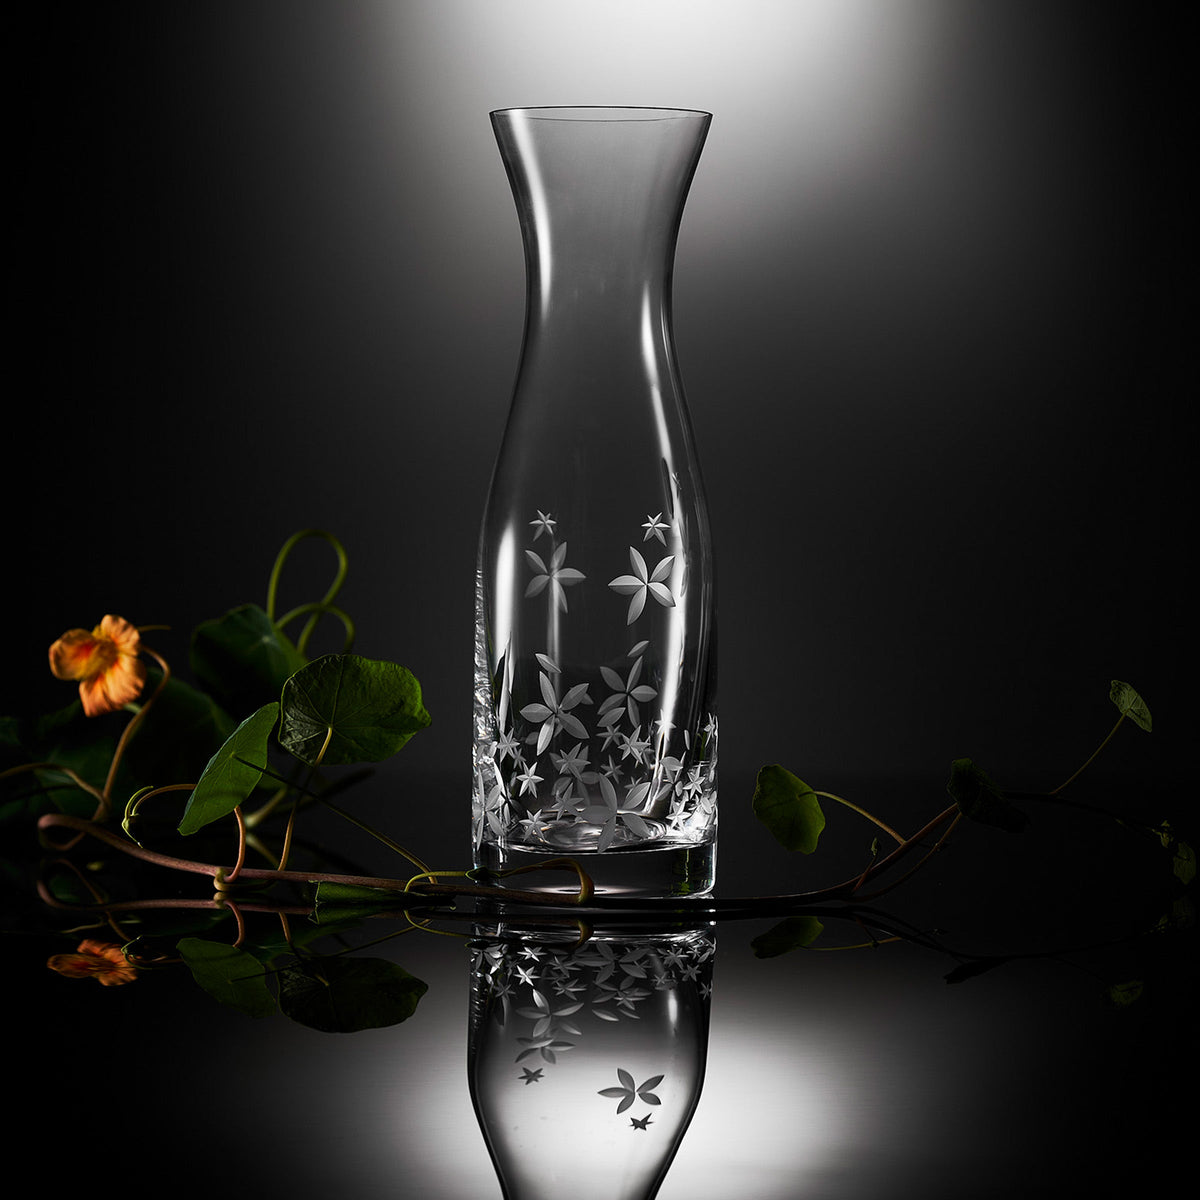 A Chatham Bloom Carafe adorned with flowers, inspired by retro shapes. Perfect for Caskata Collection enthusiasts or adding a touch of elegance to New England lawn parties.